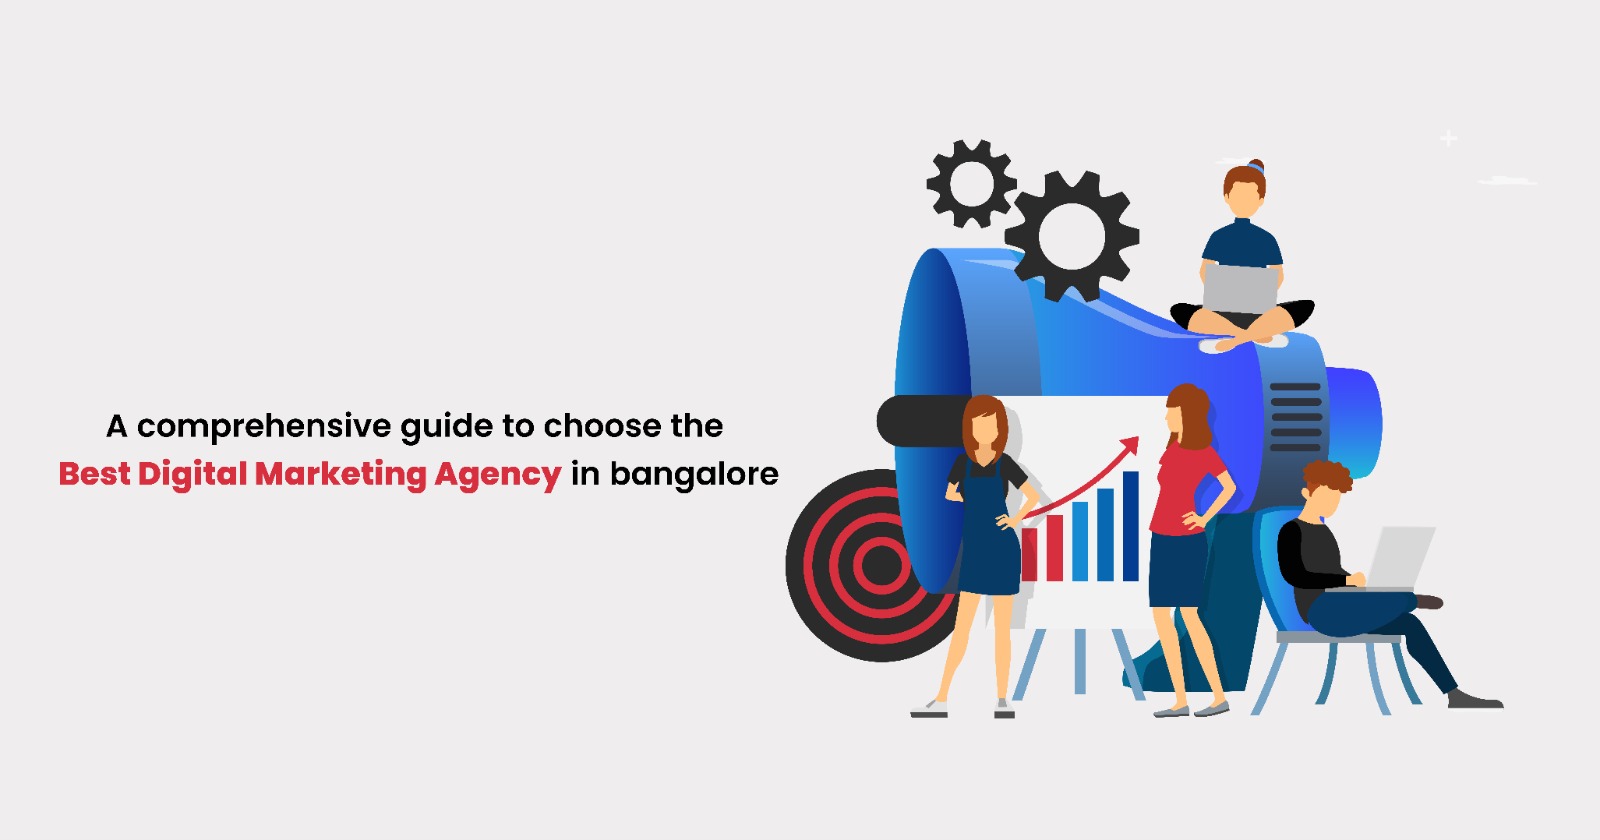 the infographic image of with text a comphrehensive guide to choose the best digital marketing agency in bangalore